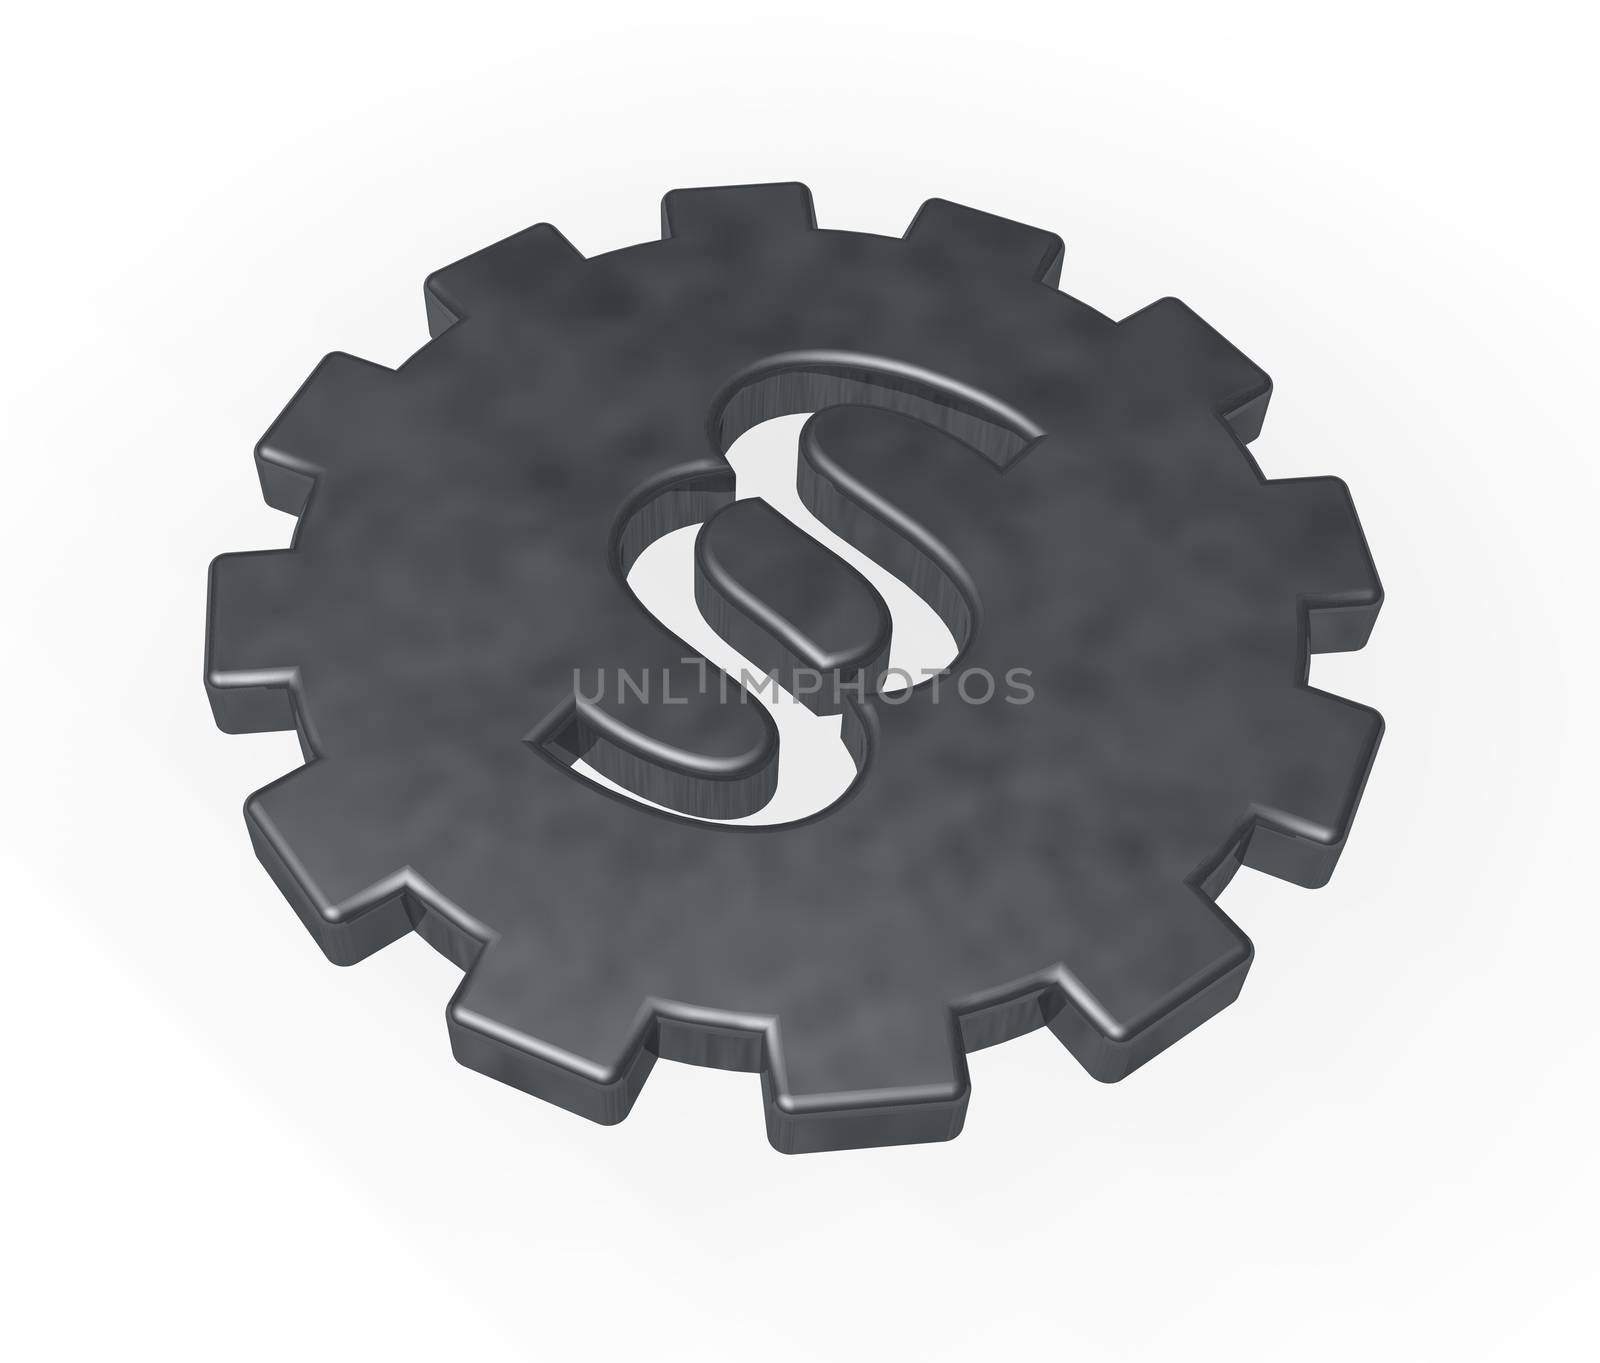 cogwheel and paragraph symbol on white background - 3d illustration